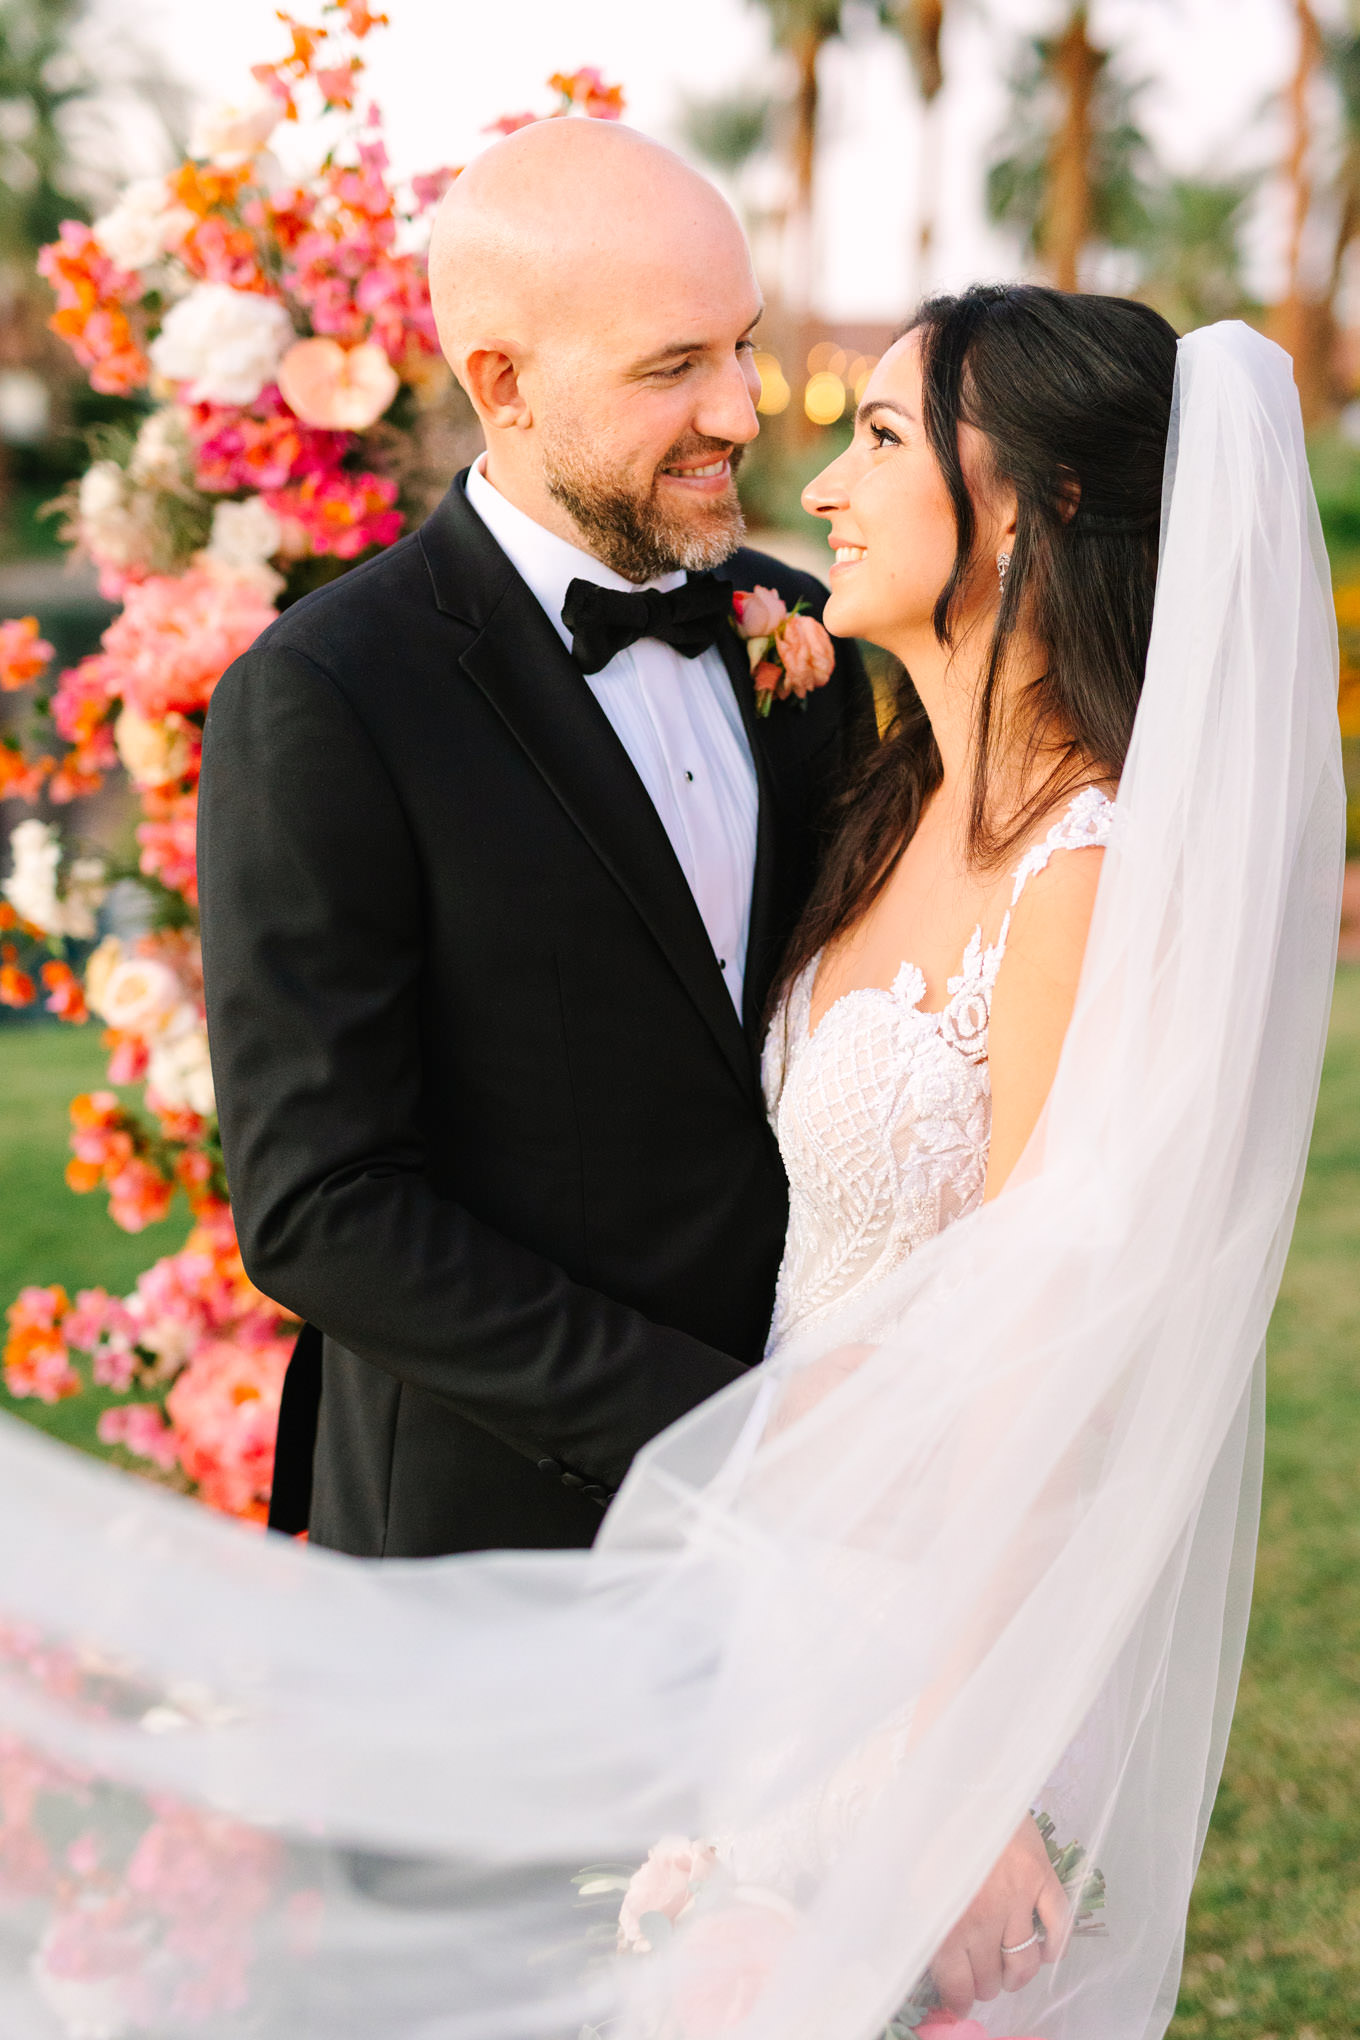 Bridal portraits | Pink Bougainvillea Estate wedding | Colorful LA wedding photography | #bougainvilleaestate #palmspringswedding #palmspringsweddingvenue #palmspringsphotographer Source: Mary Costa Photography | Los Angeles